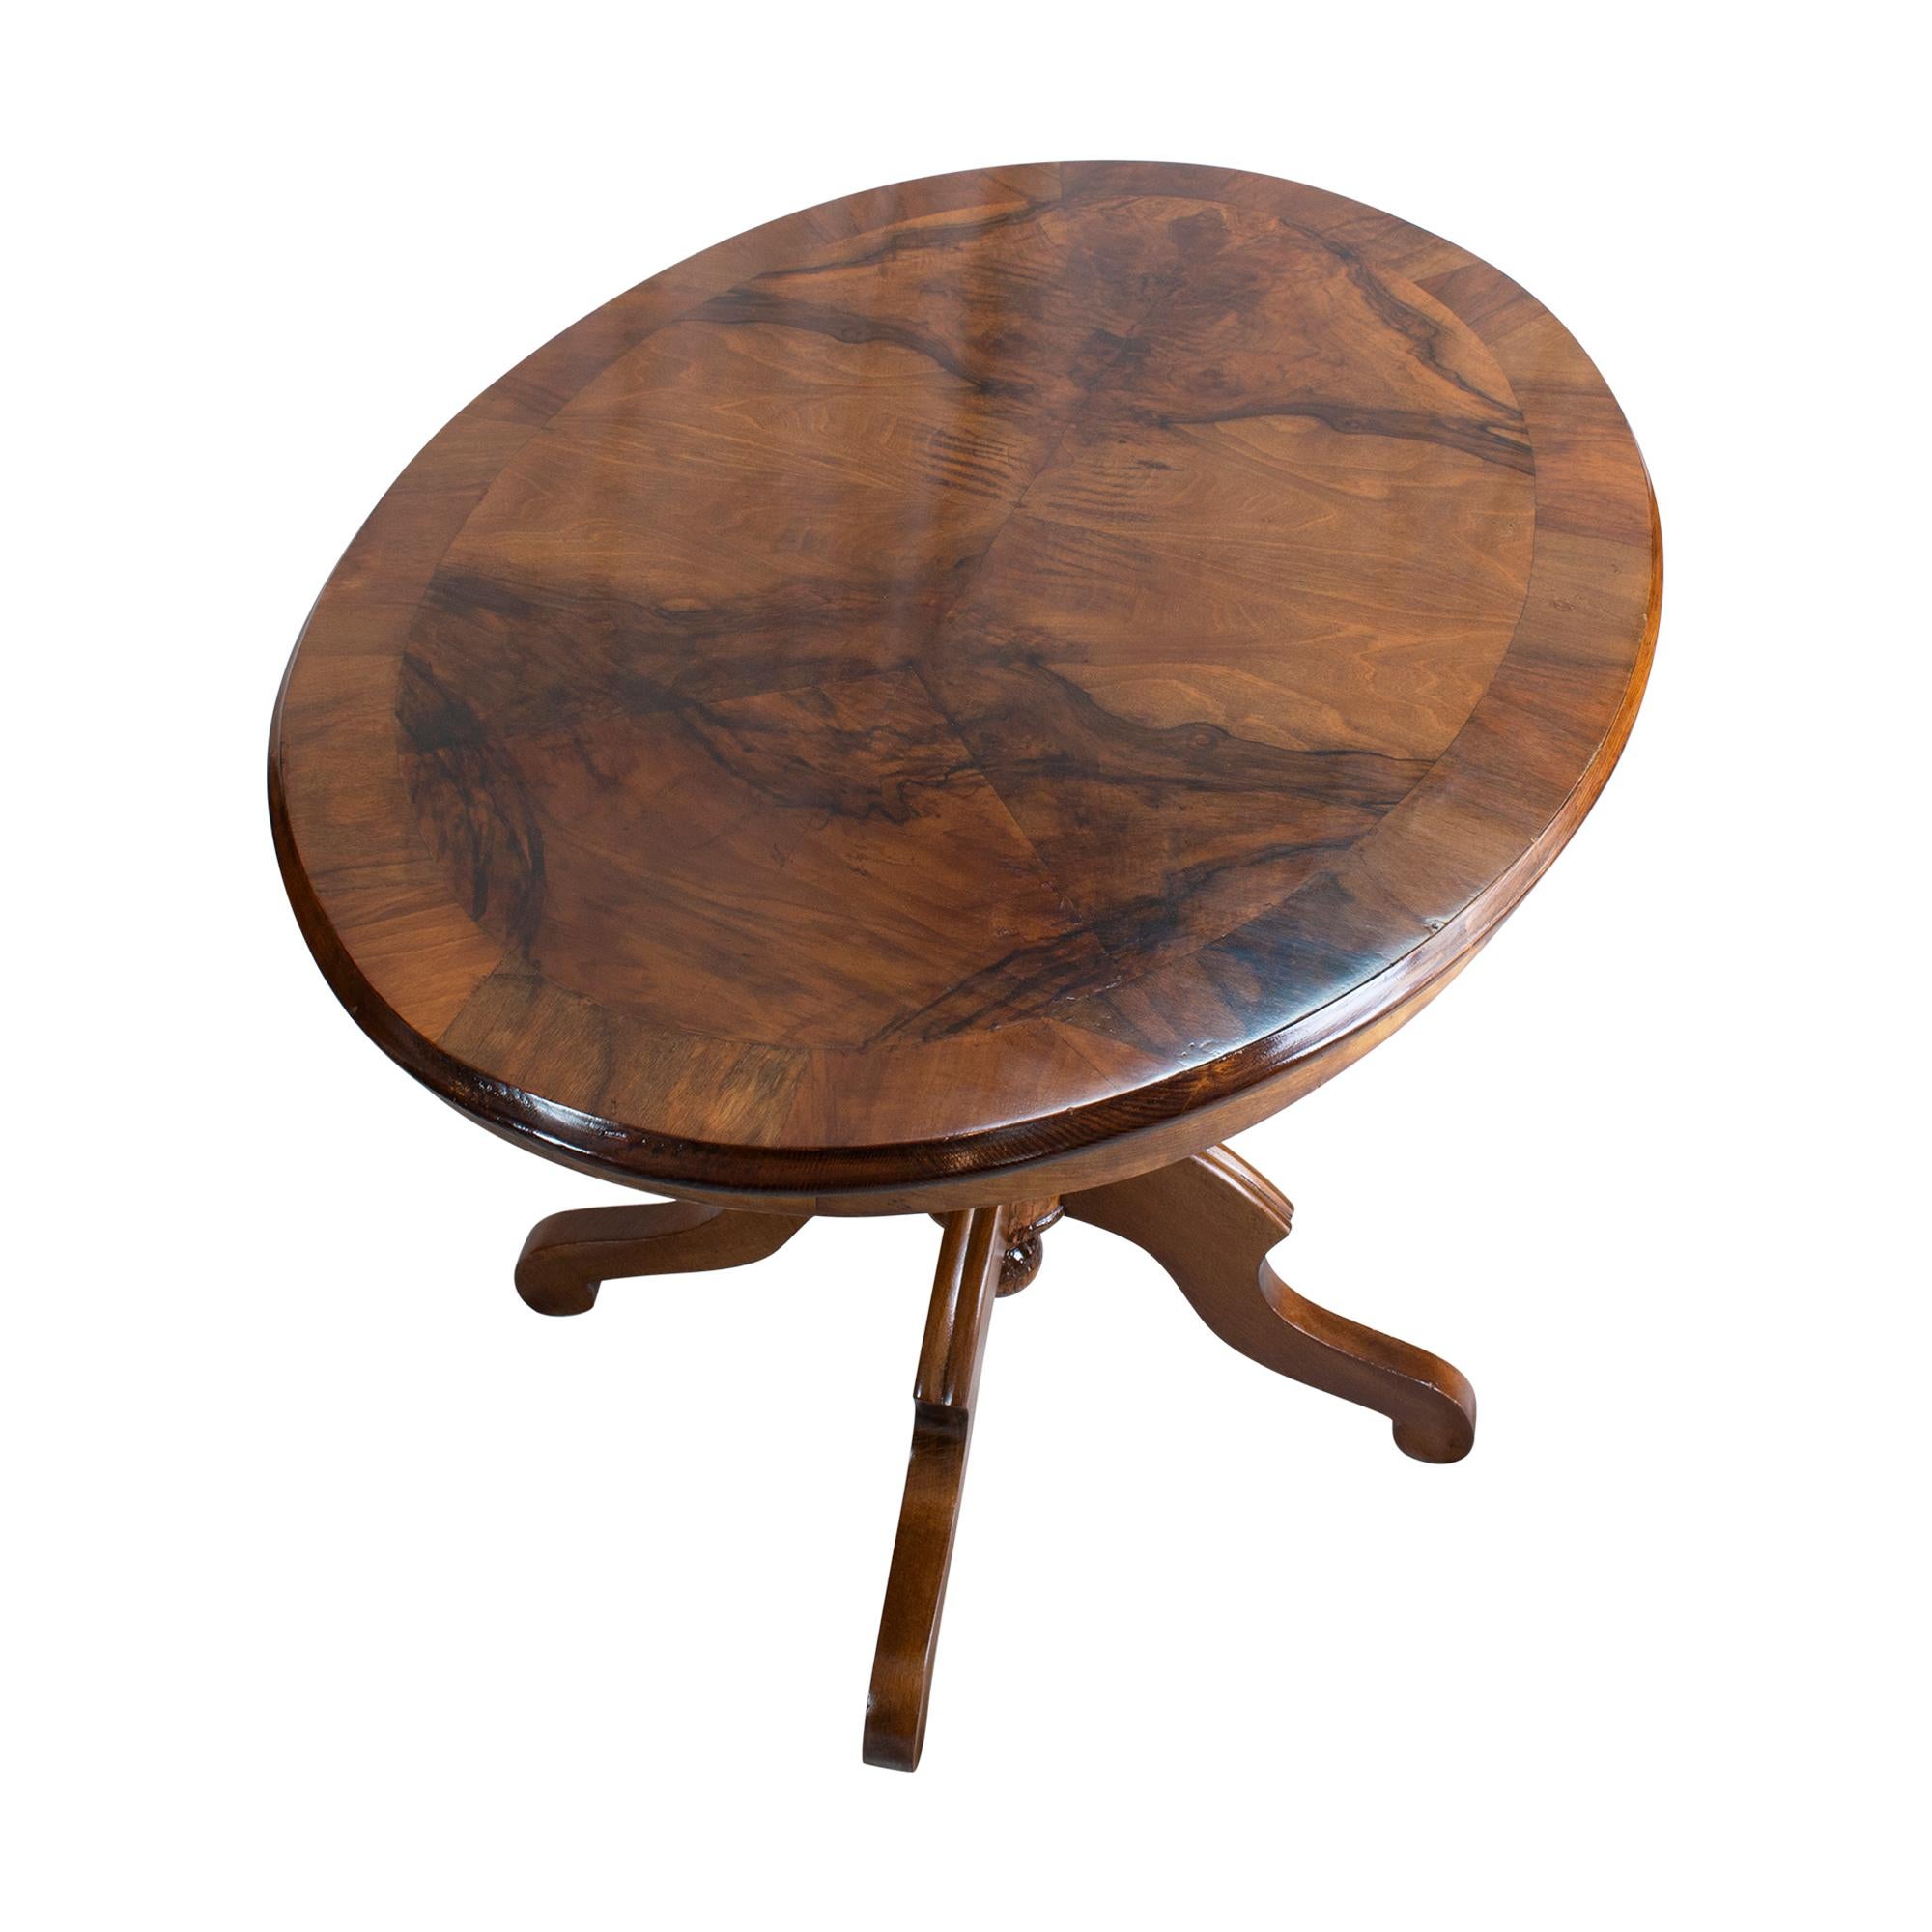 Antique Oval Walnut Veneer Table
Experience the allure of the Historismus era with this exquisite antique oval table. Crafted with stunning walnut veneer, its timeless elegance adds warmth and sophistication to any room. The detachable top offers